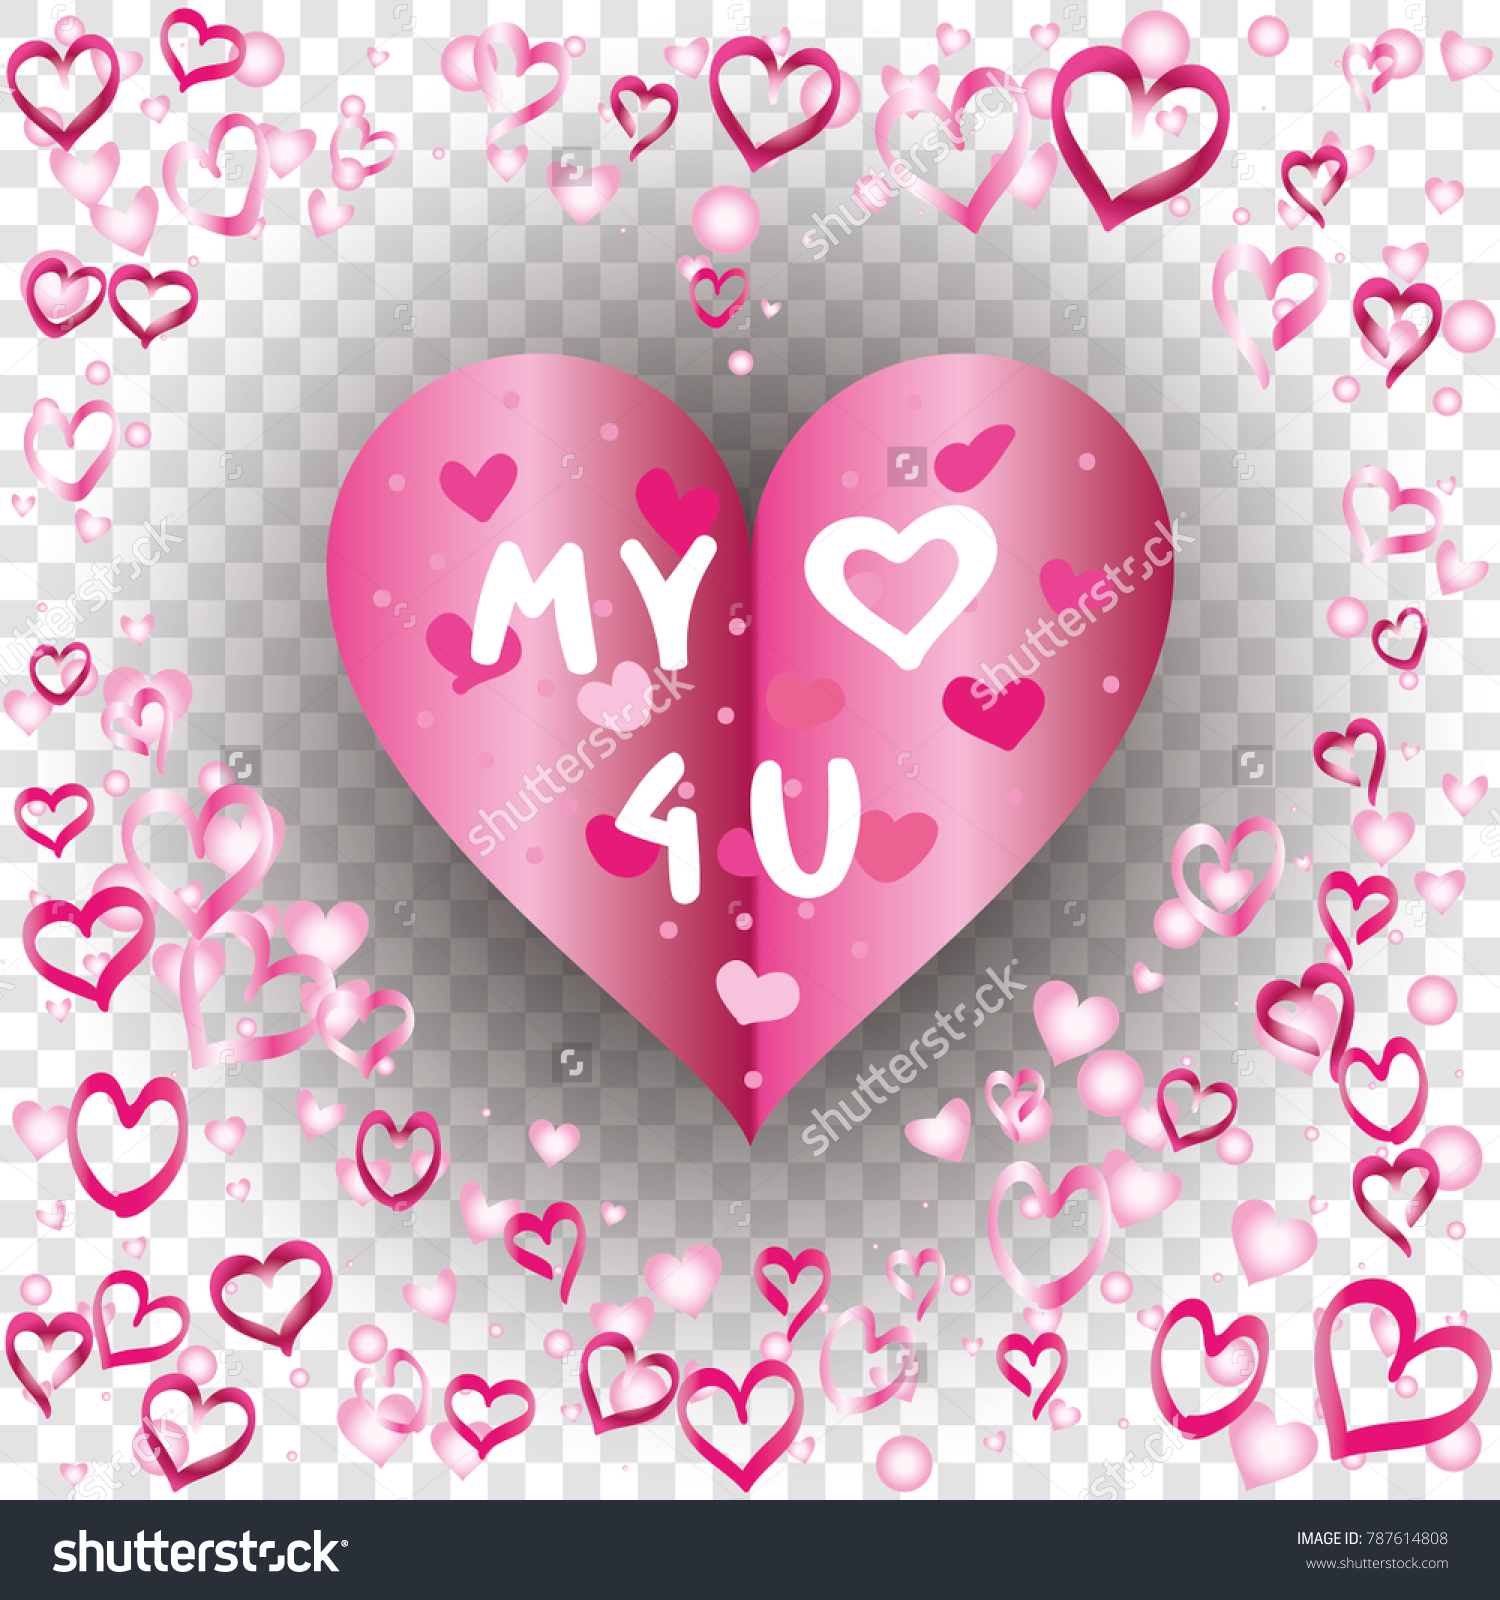 SVG of Hearts shaped Valentines day background with random hand drawn falling pink hearts and 